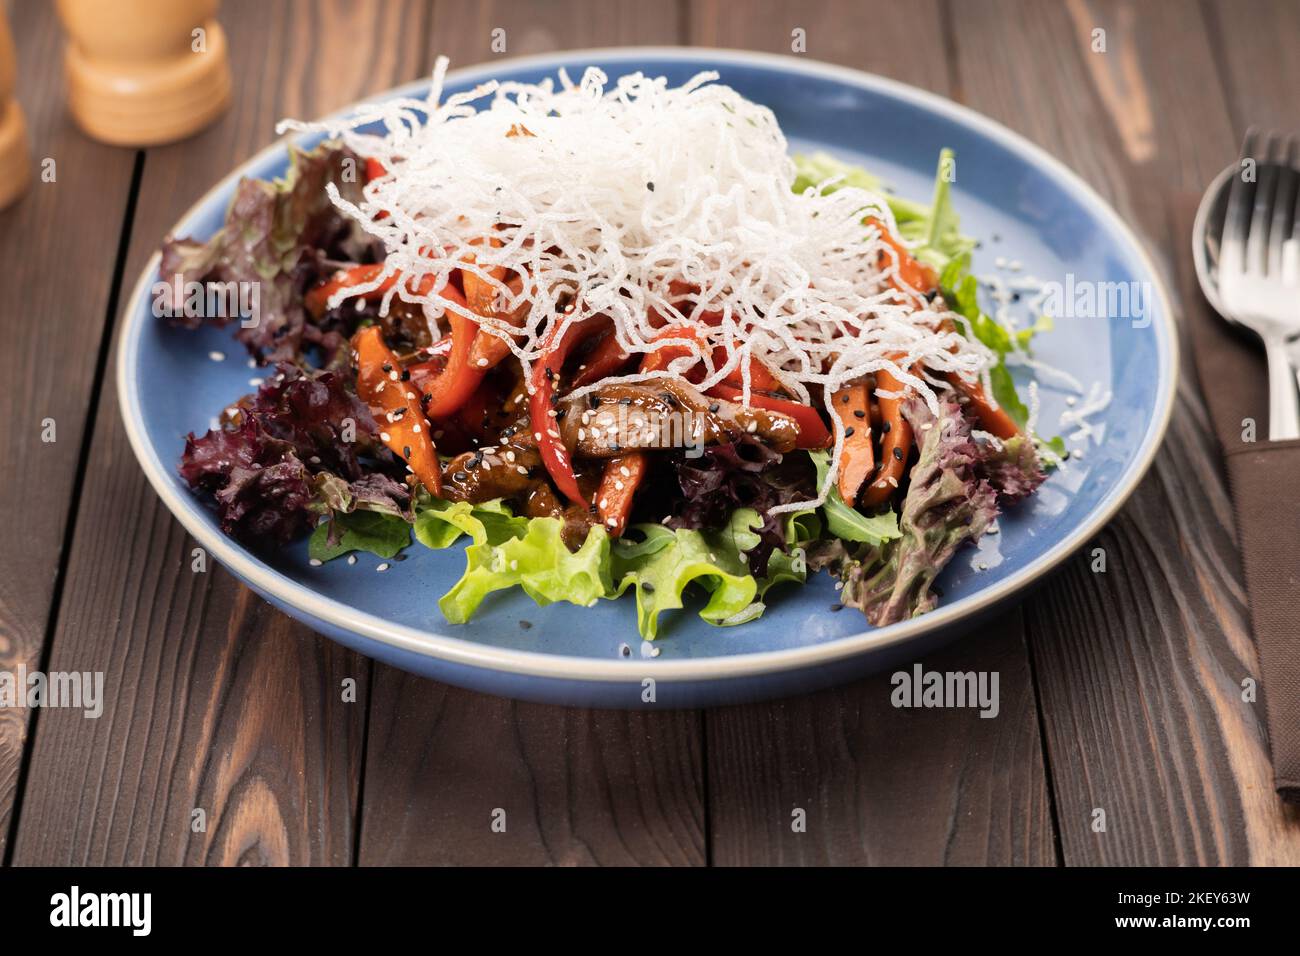 Delicious Thai Beef Salad presented in a blue plate Stock Photo